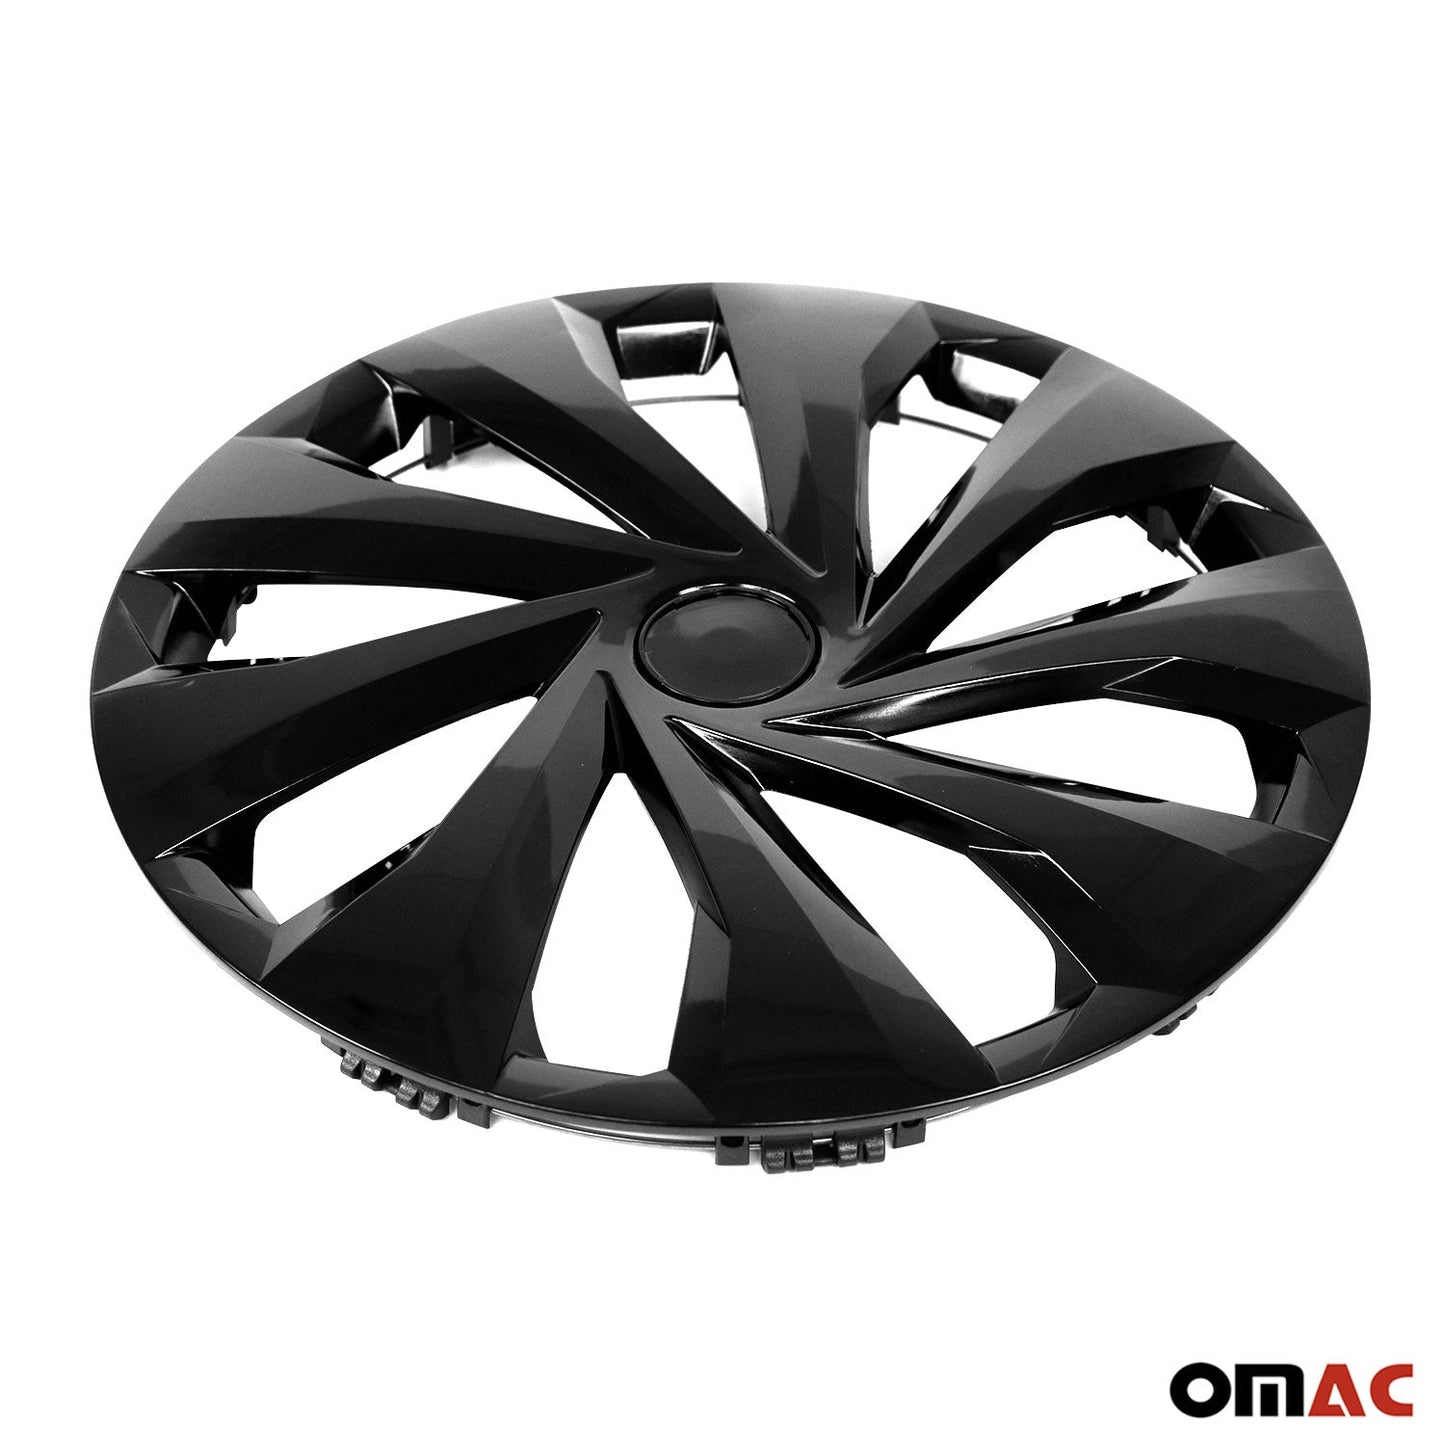 OMAC 15 Inch Wheel Covers Hubcaps for BMW ABS Black 4x G002449